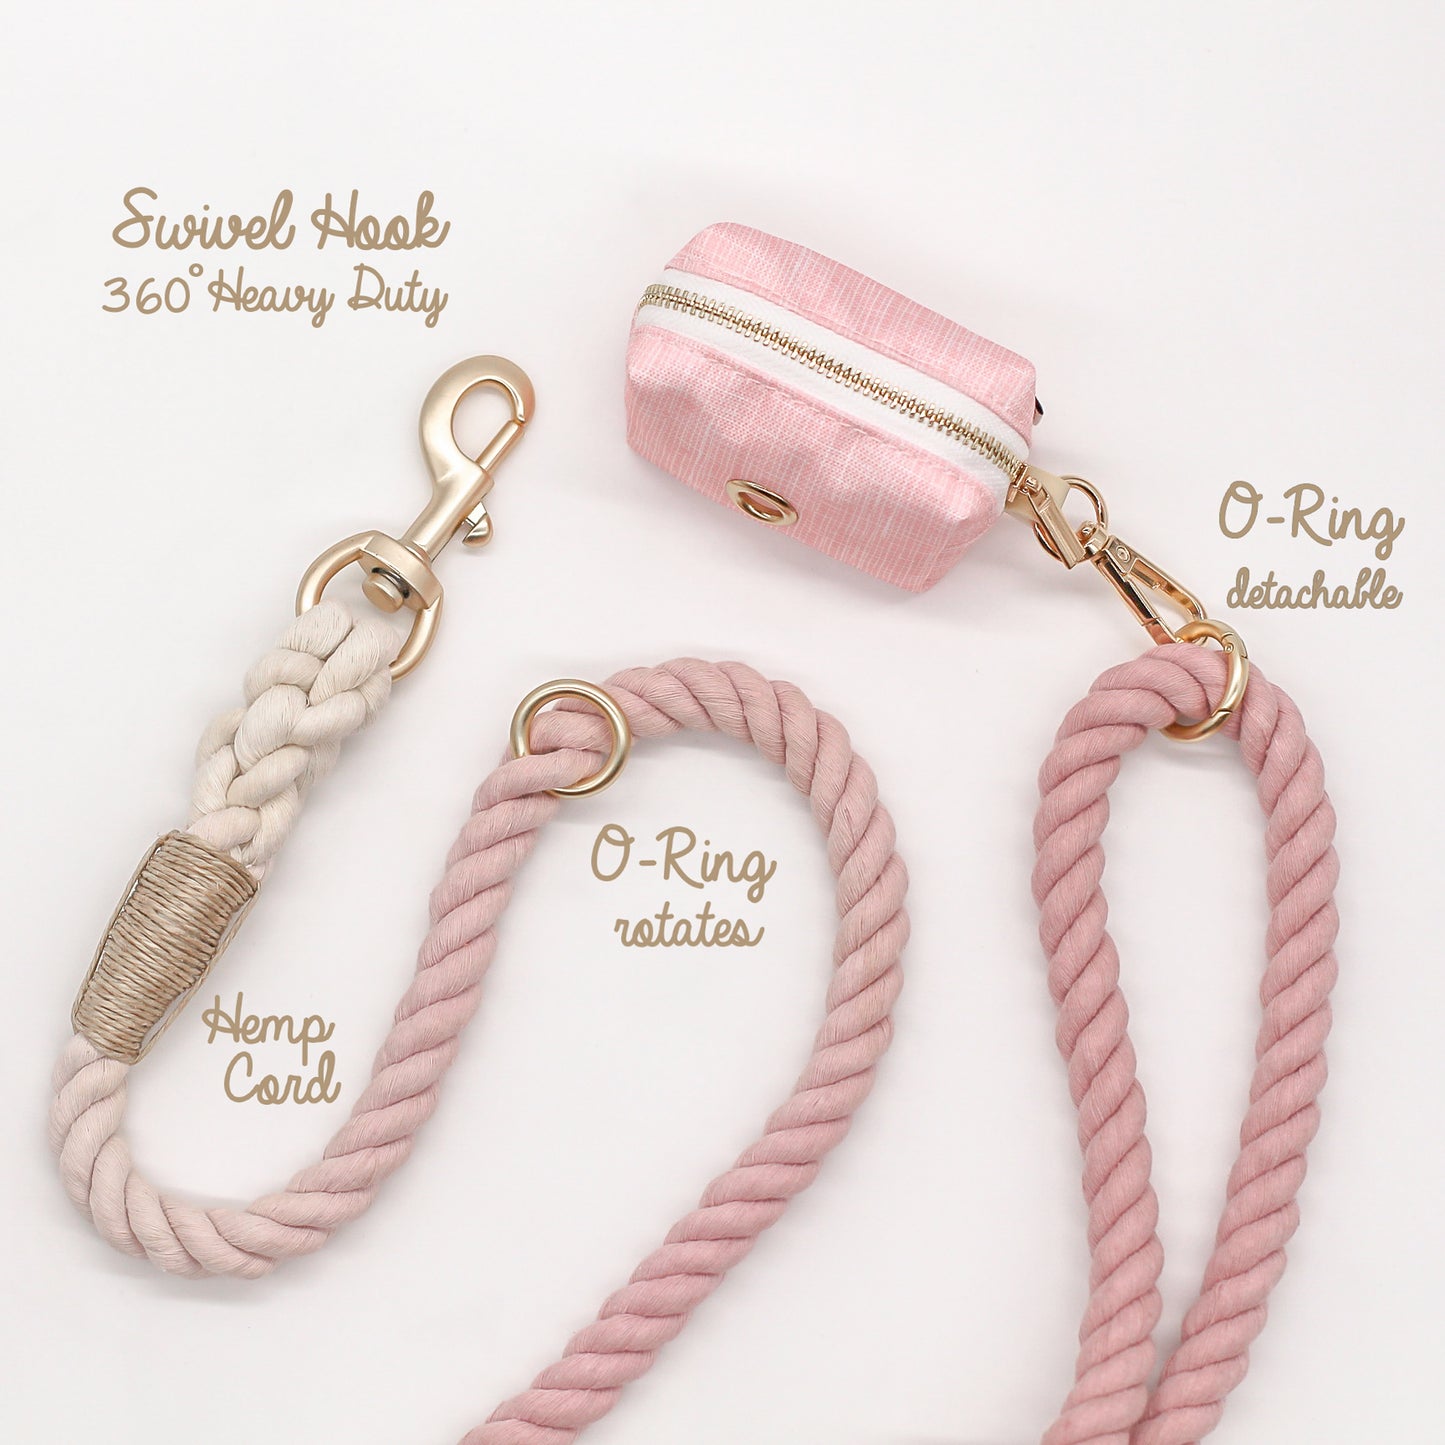 100% cotton rope leash ombre dusty pink pastel 5ft handle ORing gold hardware dog walking pet accessory  fade hemp cord with matching set combo poop bag holder dispenser bop pop pets